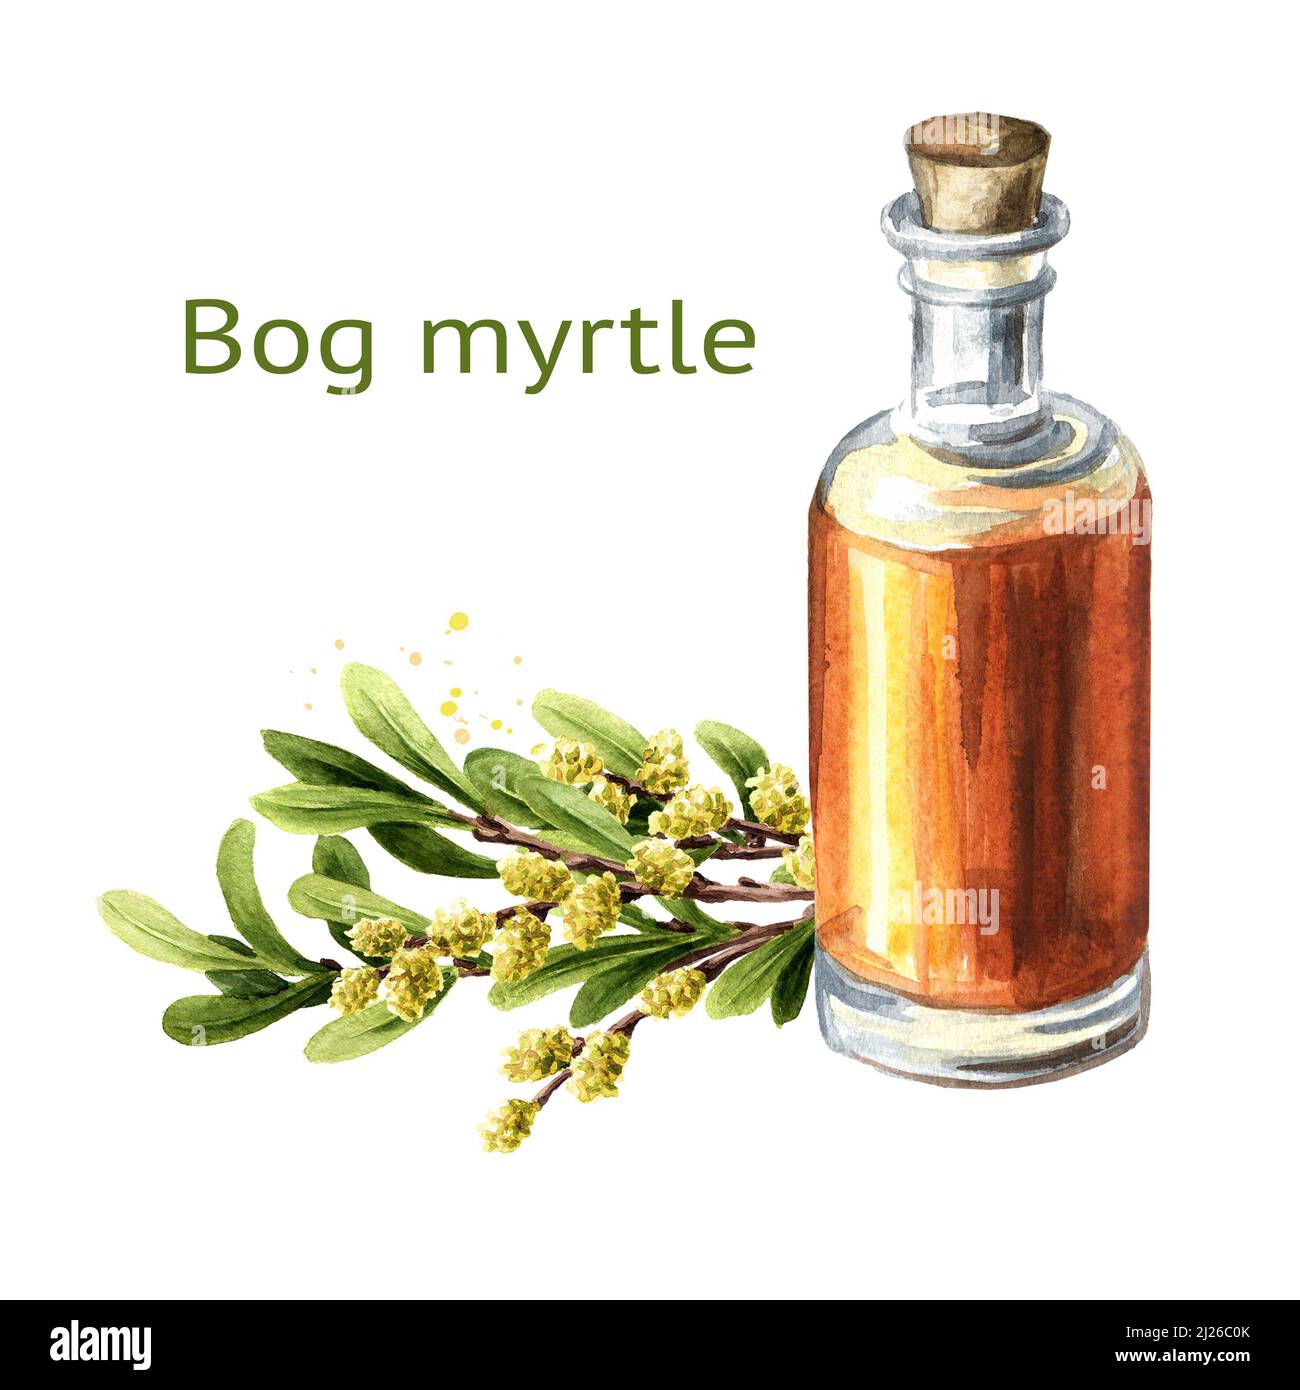 Bog myrtle tincture, medicinal plant. Hand drawn watercolor illustration, isolated on white background Stock Photo